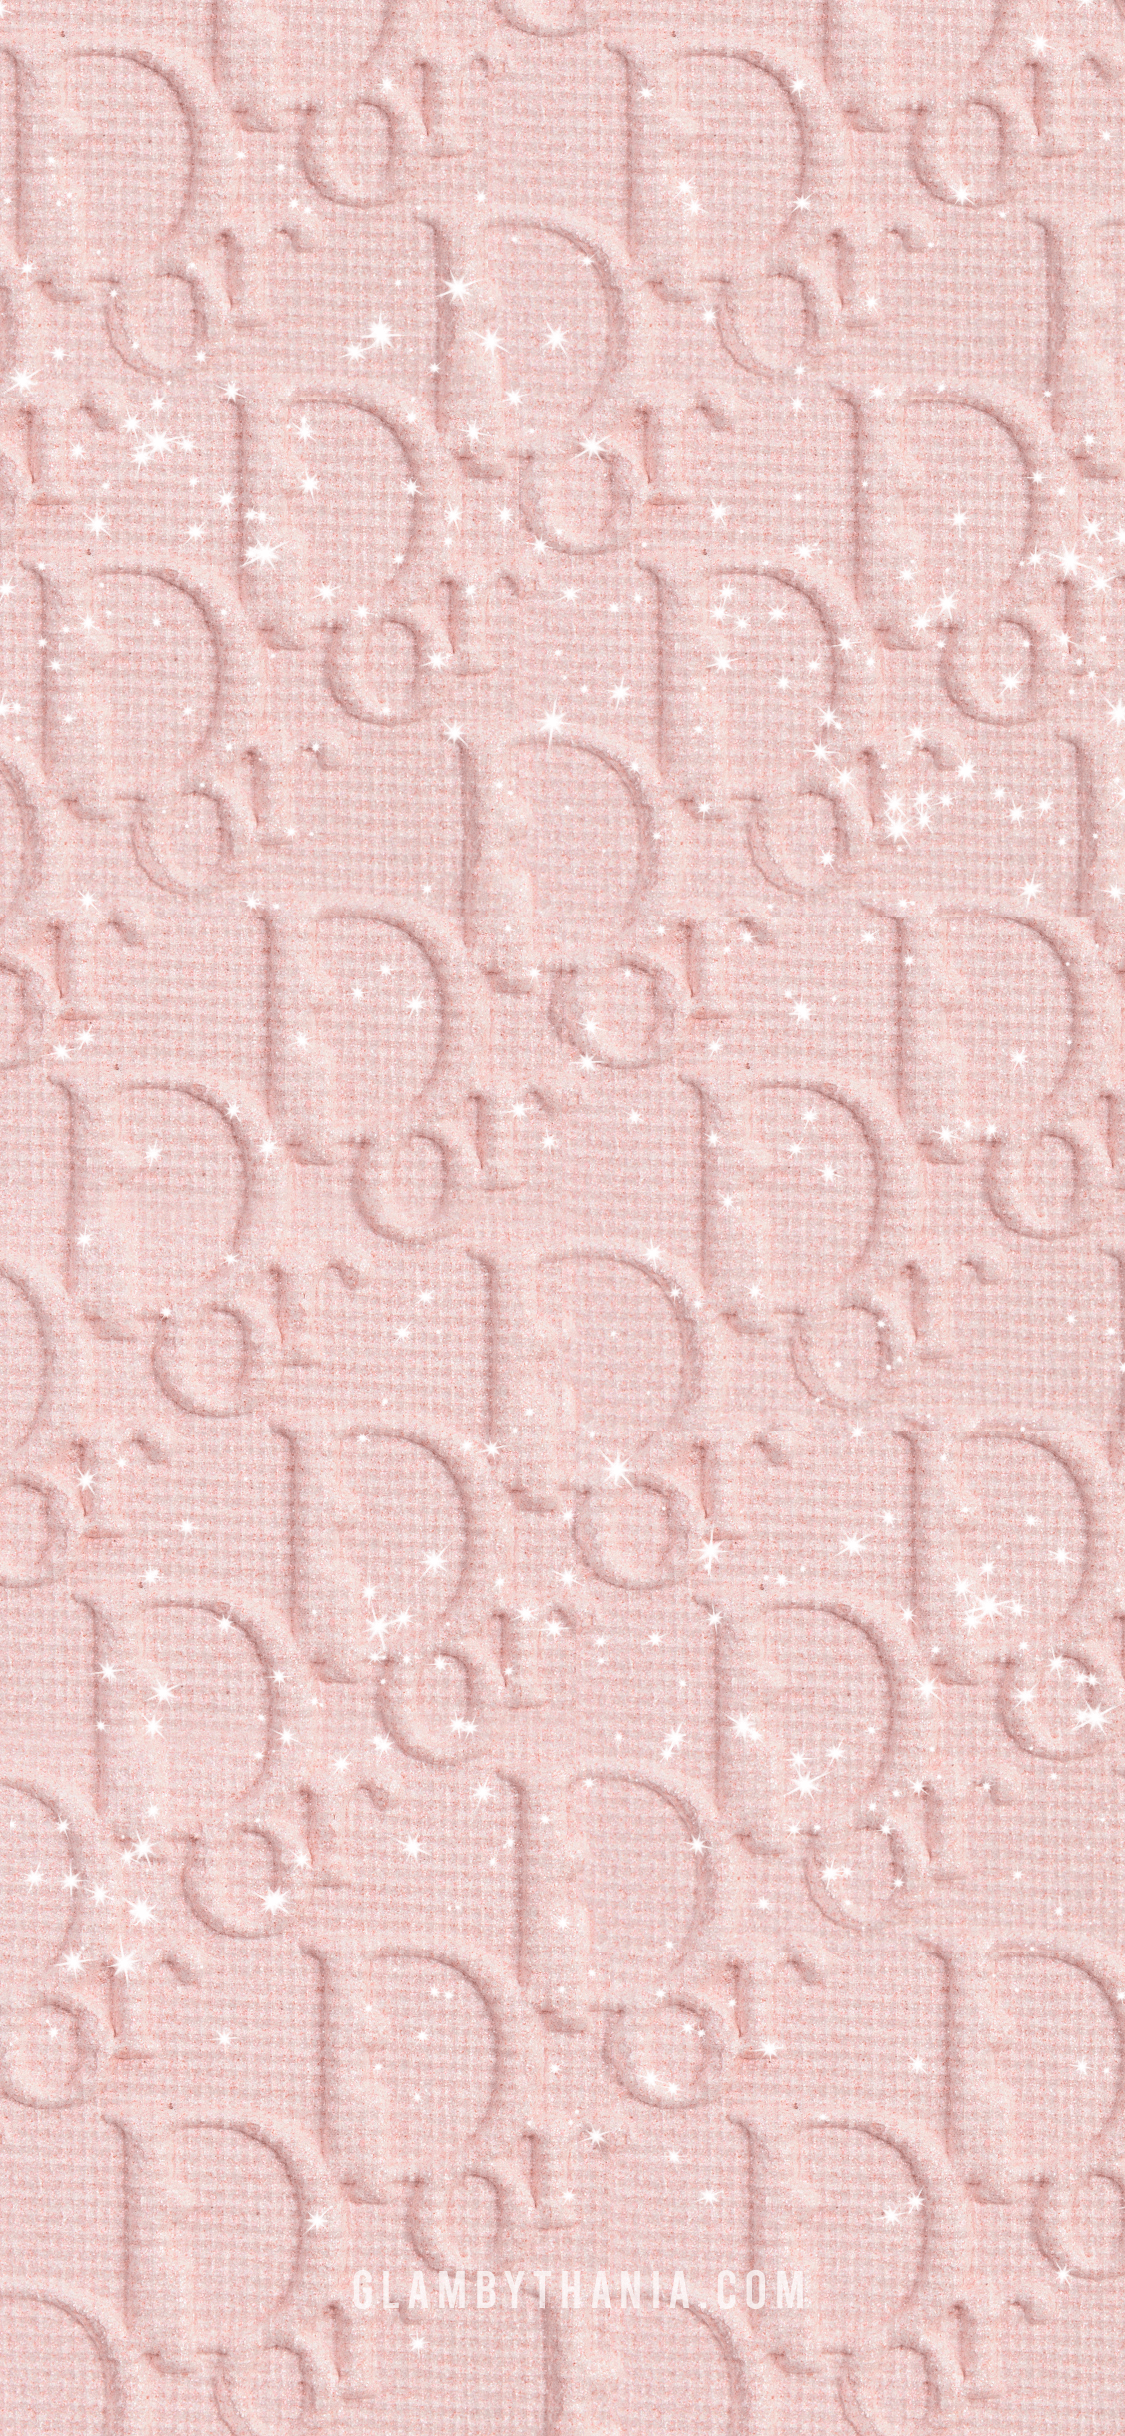 Free Designer Wallpapers - Phone Backgrounds by FLIPANDSTYLE  Louis vuitton  iphone wallpaper, Pink wallpaper iphone, Iphone wallpaper glitter